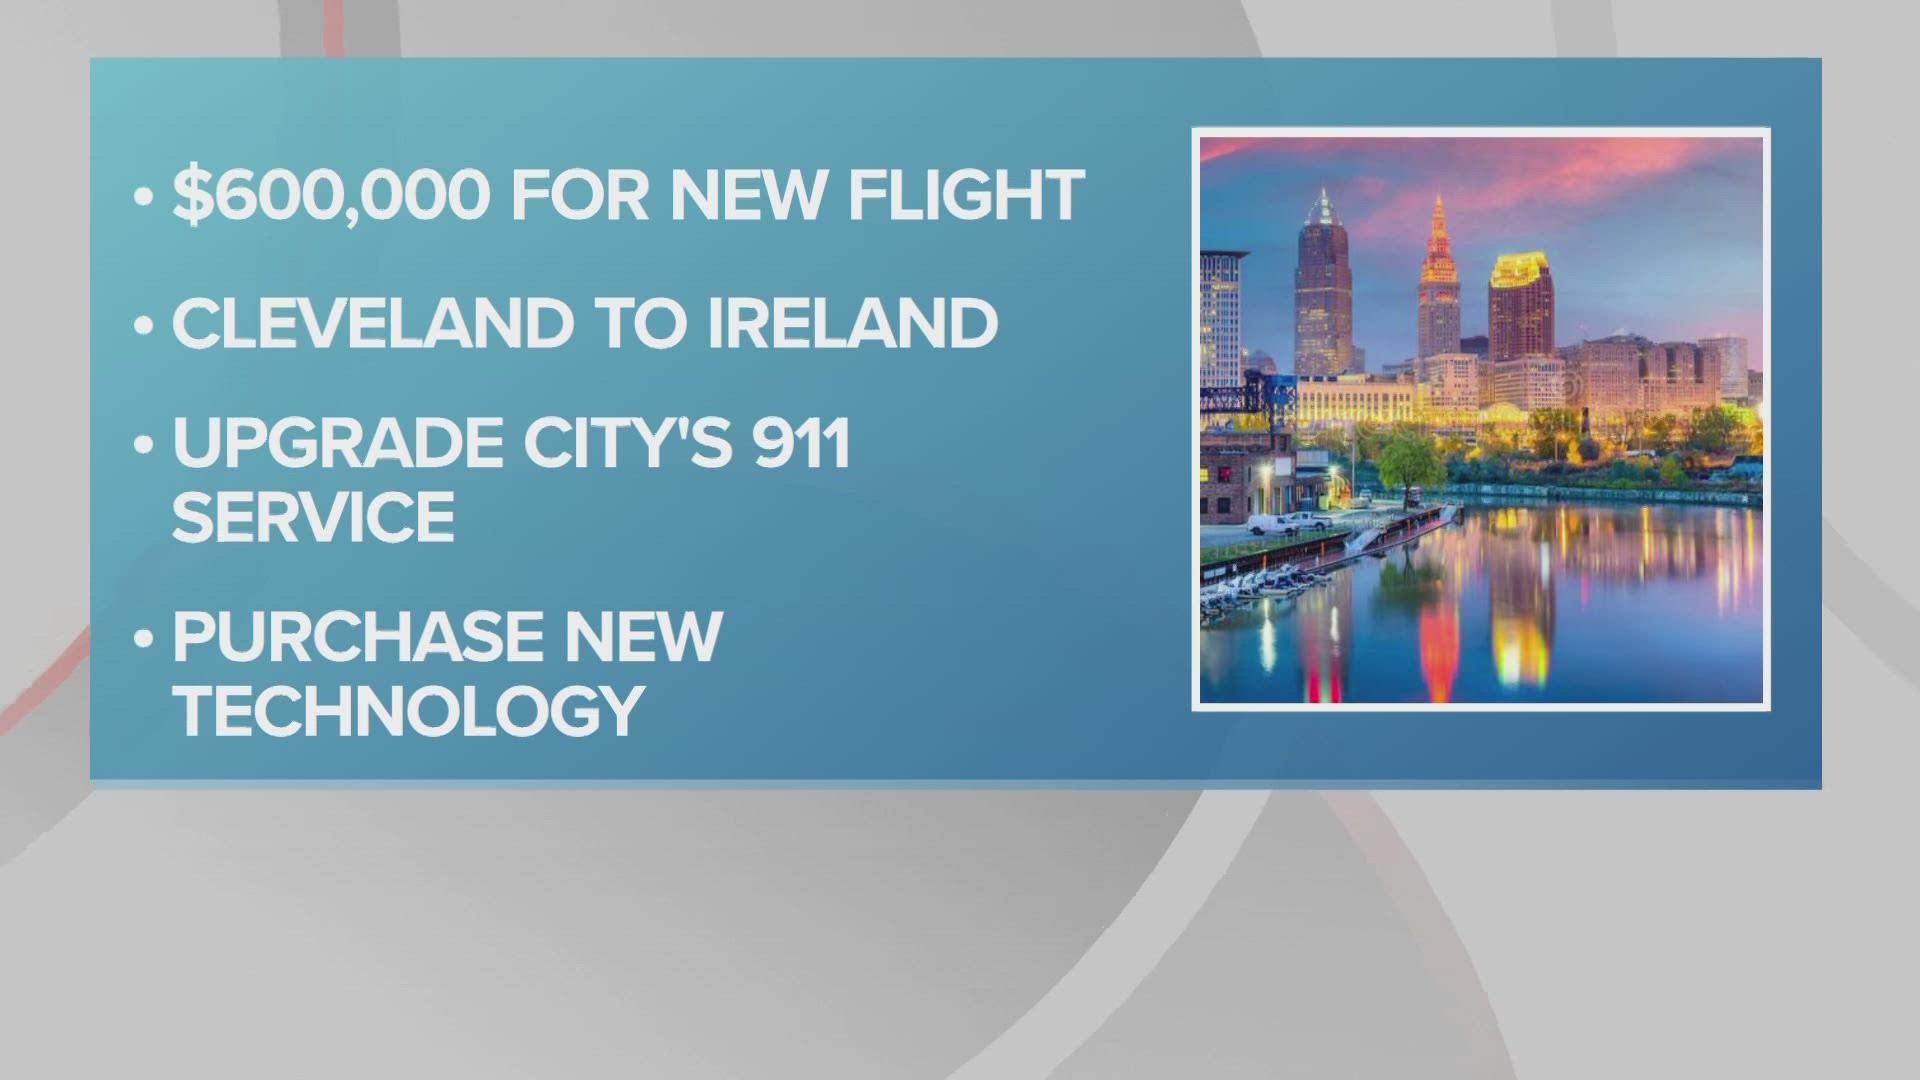 An announcement about Aer Lingus' new Cleveland-to-Ireland service is expected to come during a press conference on Wednesday afternoon at Hopkins Airport.